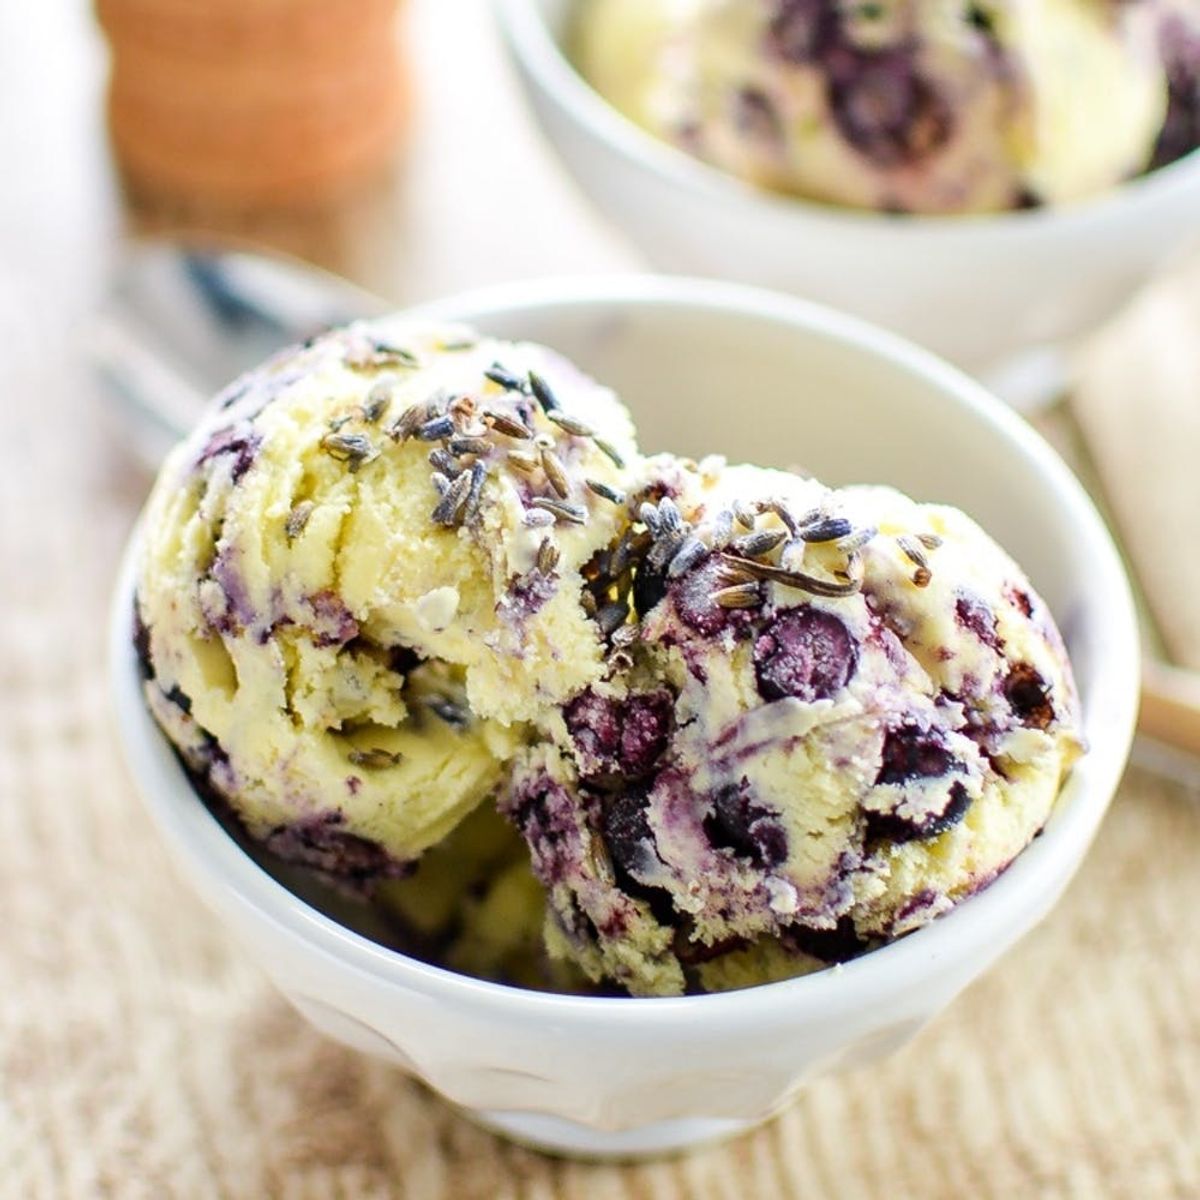 15 Ice Cream Recipes That Will Make You Forget It’s Winter